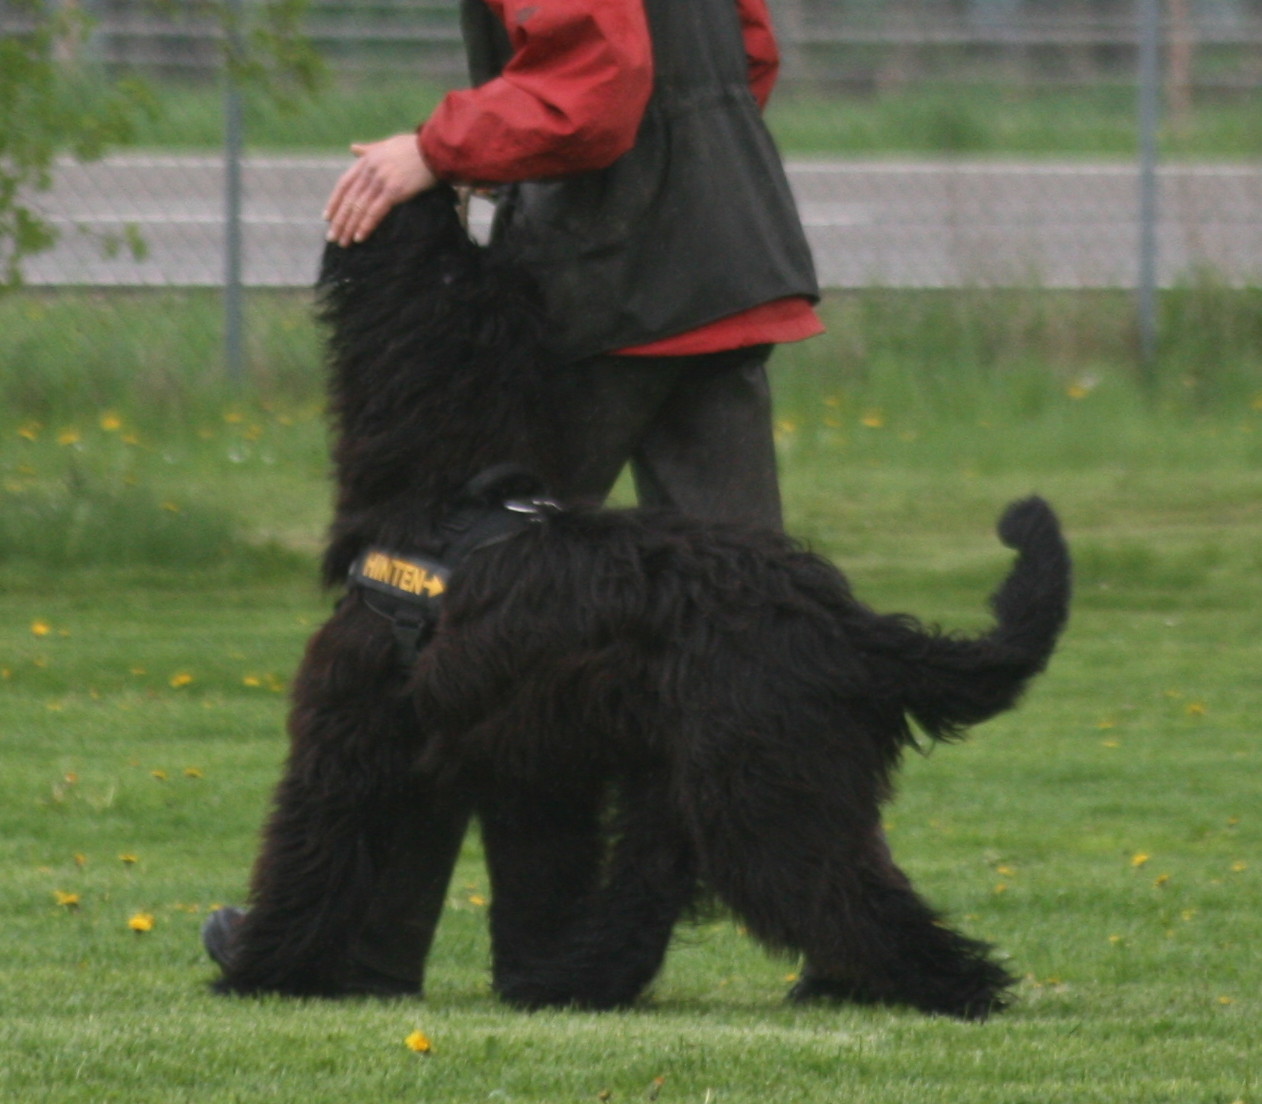 April 2013, Training Obedience